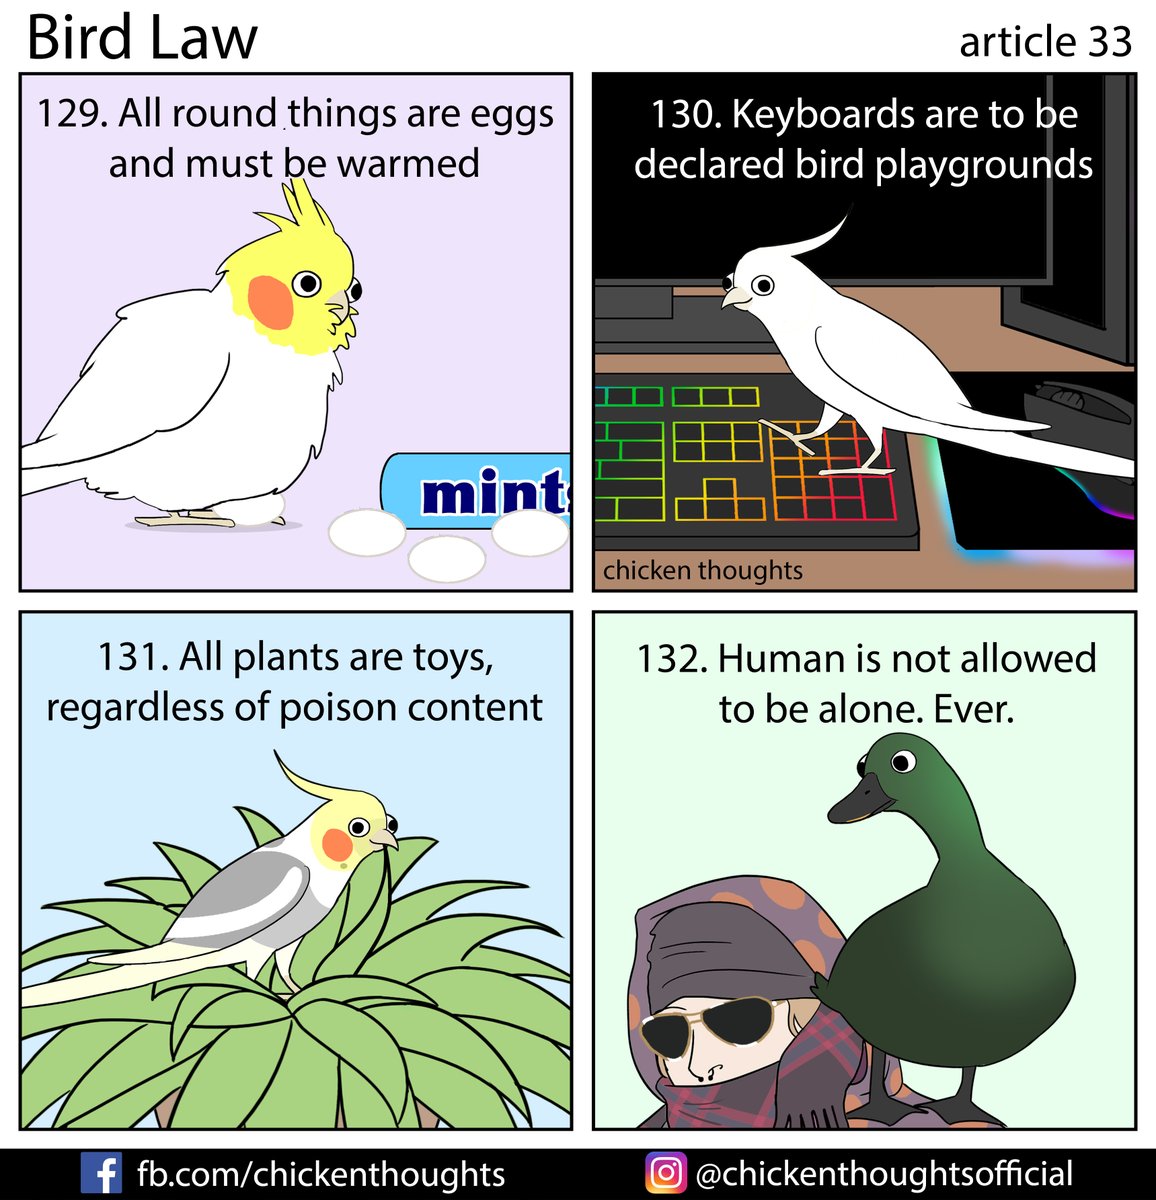 Bird law article 33 starring Nari, @fifinabird, Pepper, and Snipps (A duckys tale)!